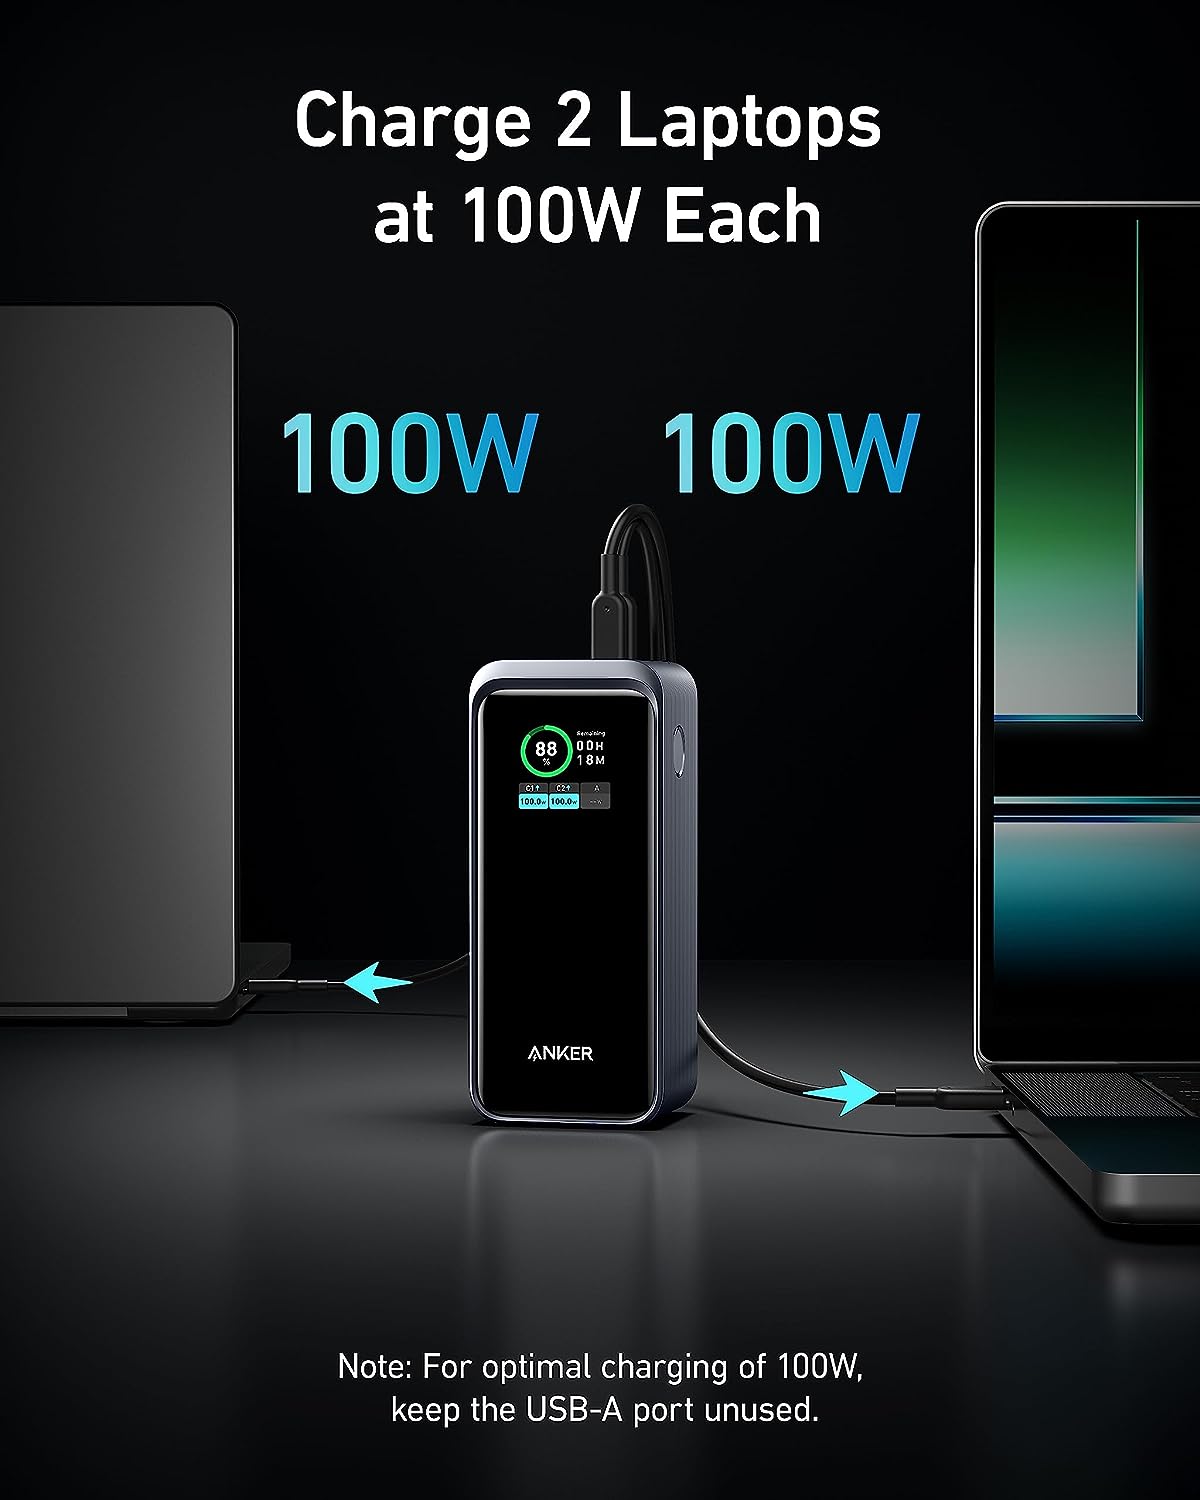 Anker Prime Power Bank, 20,000mAh Portable Charger with 200W Output